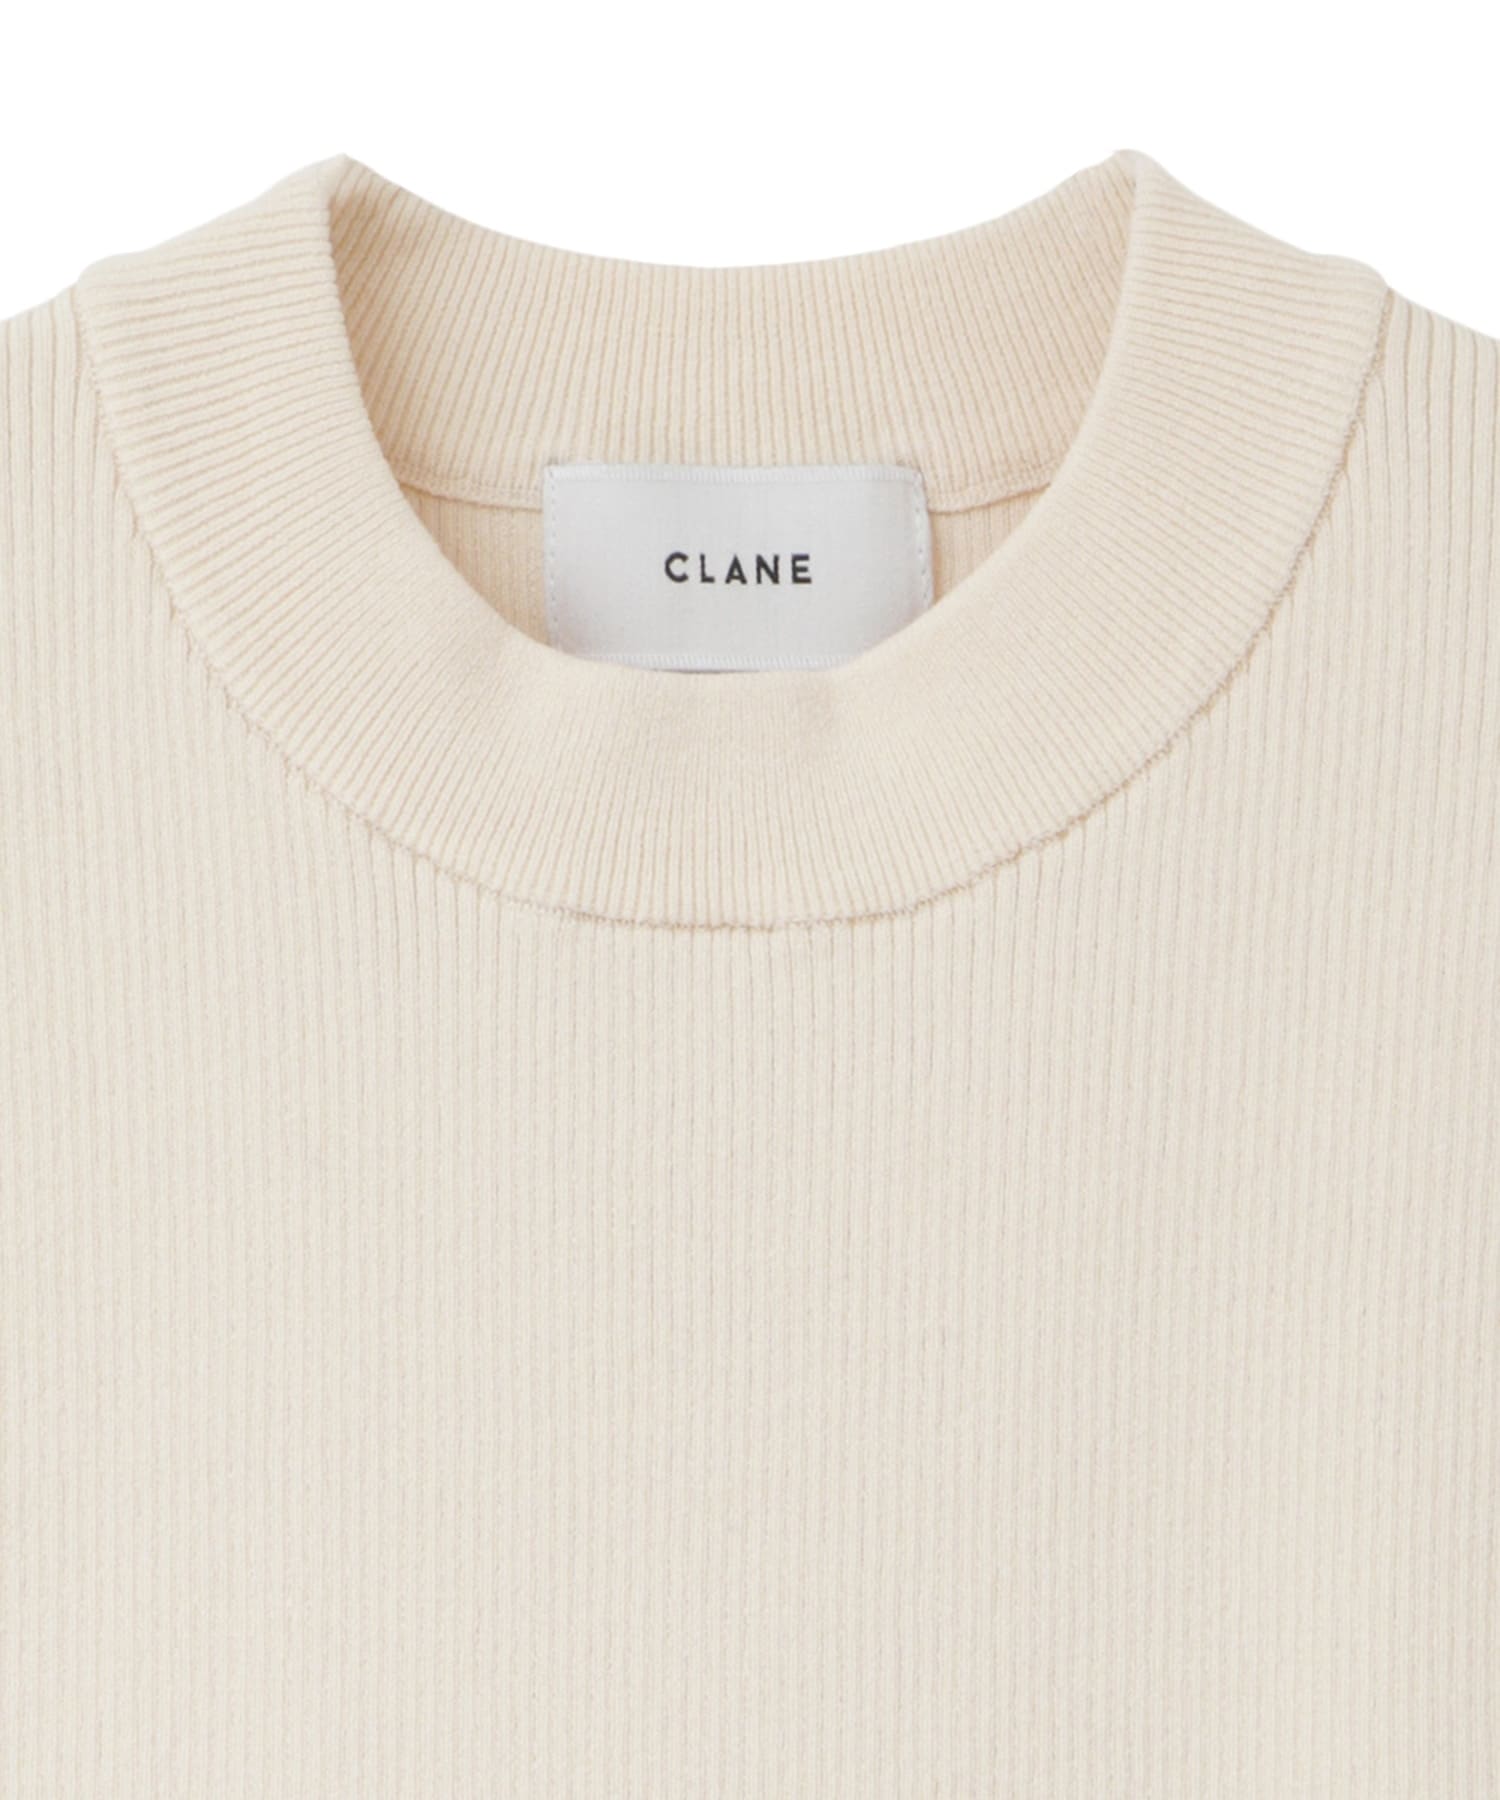 SQUARE SLEEVE KNIT TOPS CLANE